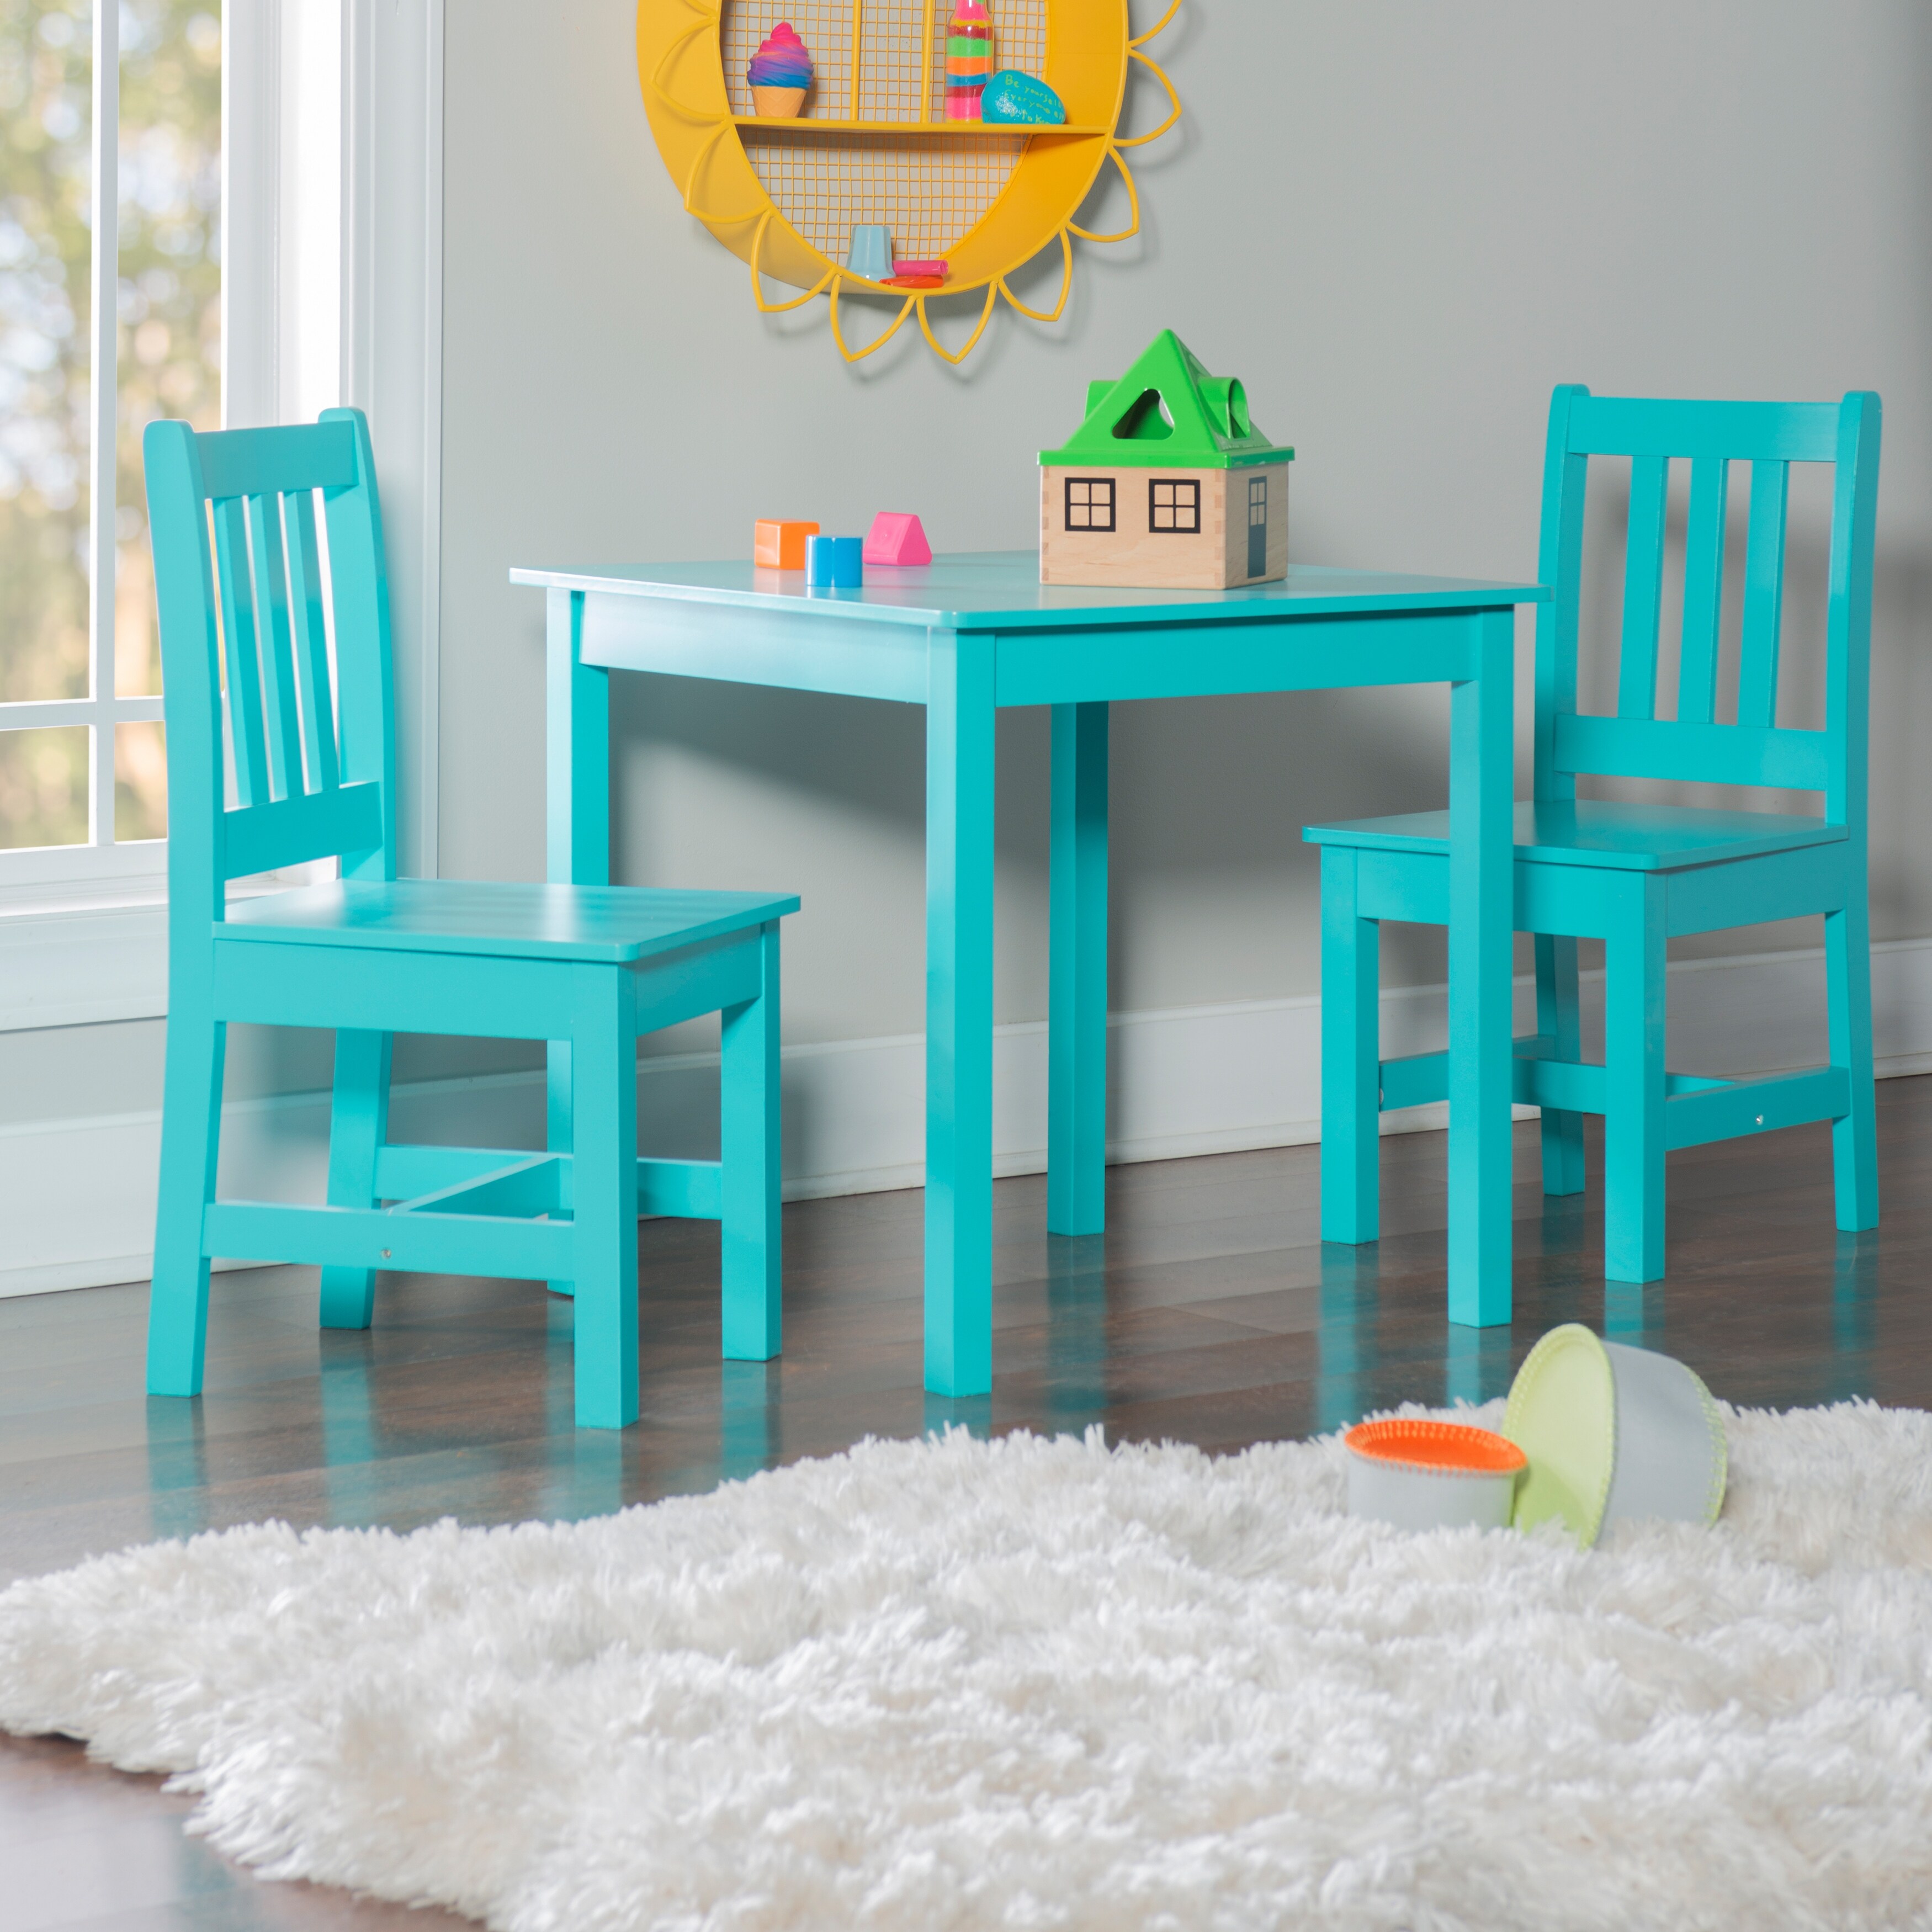 Kids Childrens Plastic Study Garden or Inside table and chairs set for Boys and Girls Red Blue Green Pink